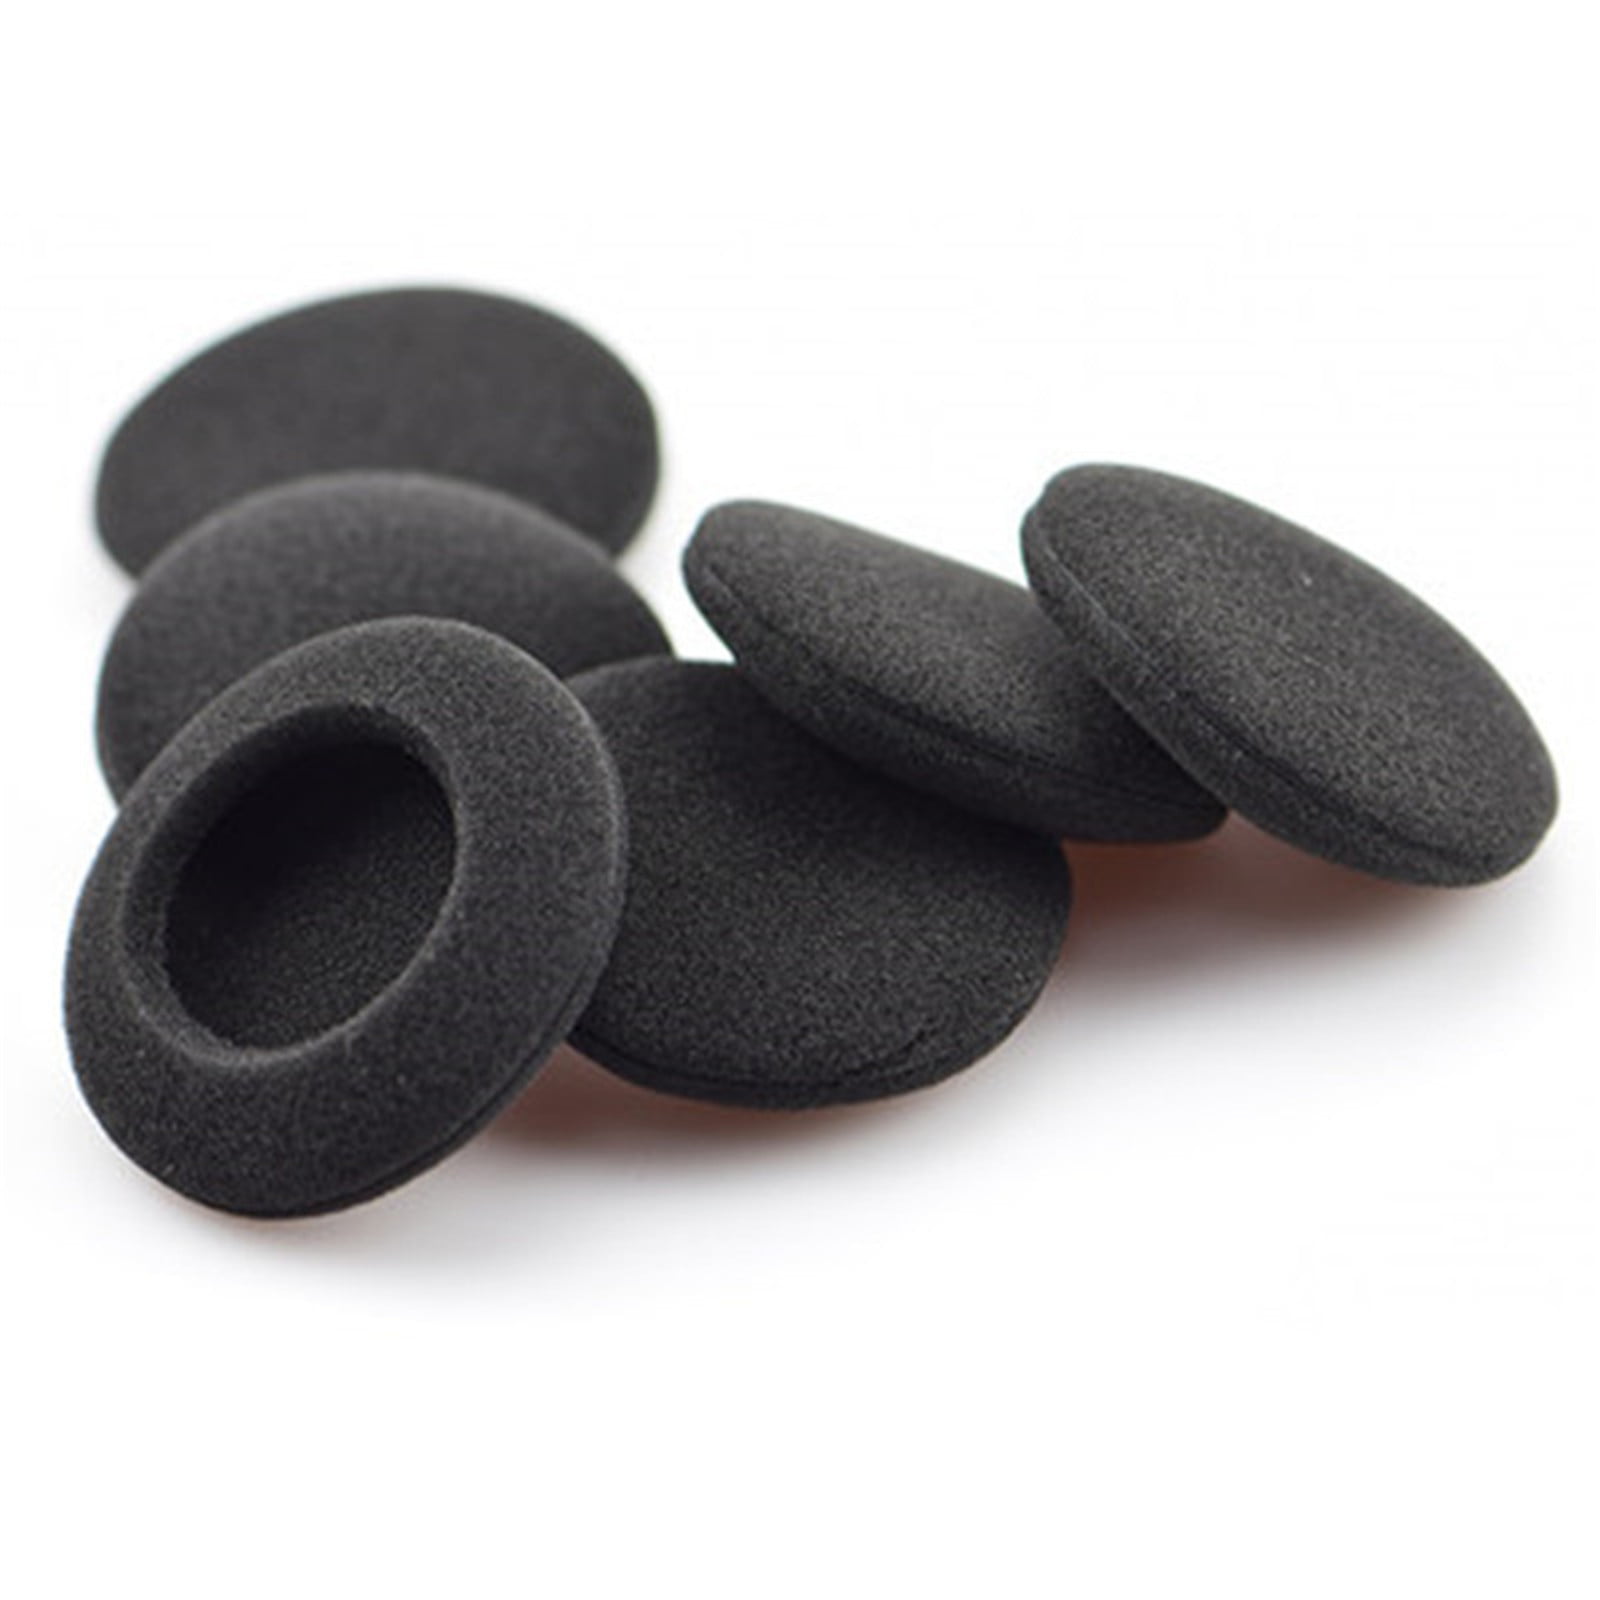 Legitim Hoved Løft dig op Ear Pads Cushion Cover Earpads Replacement Compatible with Logitech- H600 H  600 Wireless Headset Earpads Cover - Walmart.com